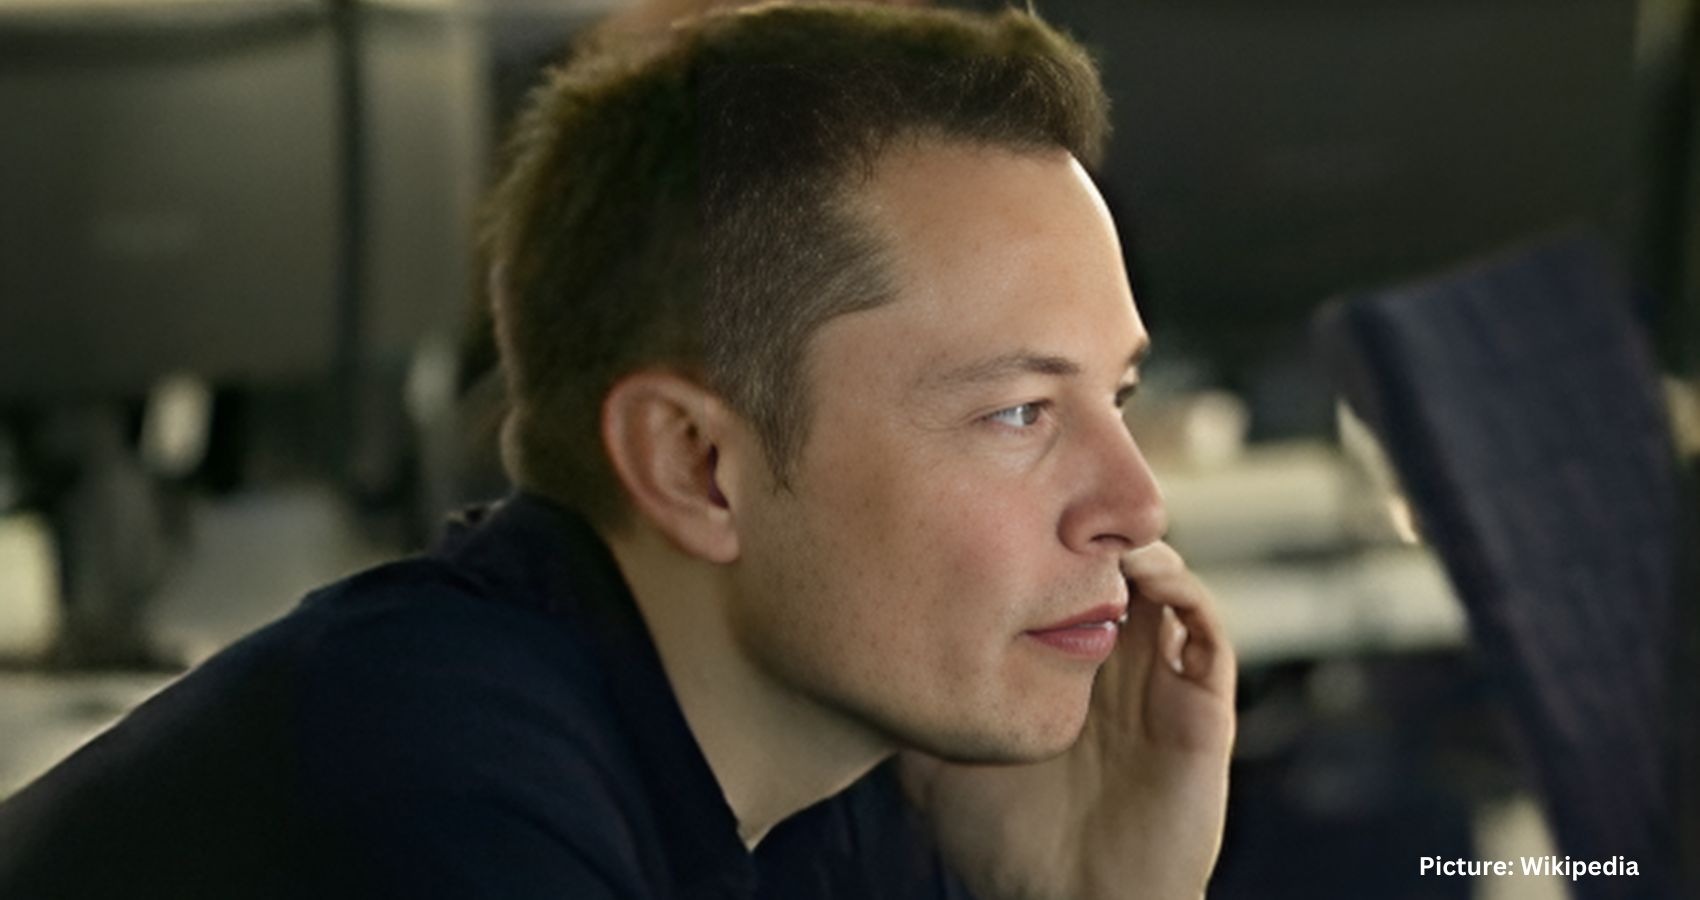 Top 10 Highest-Paid U.S. CEOs of 2023: Elon Musk Leads with $1.4 Billion